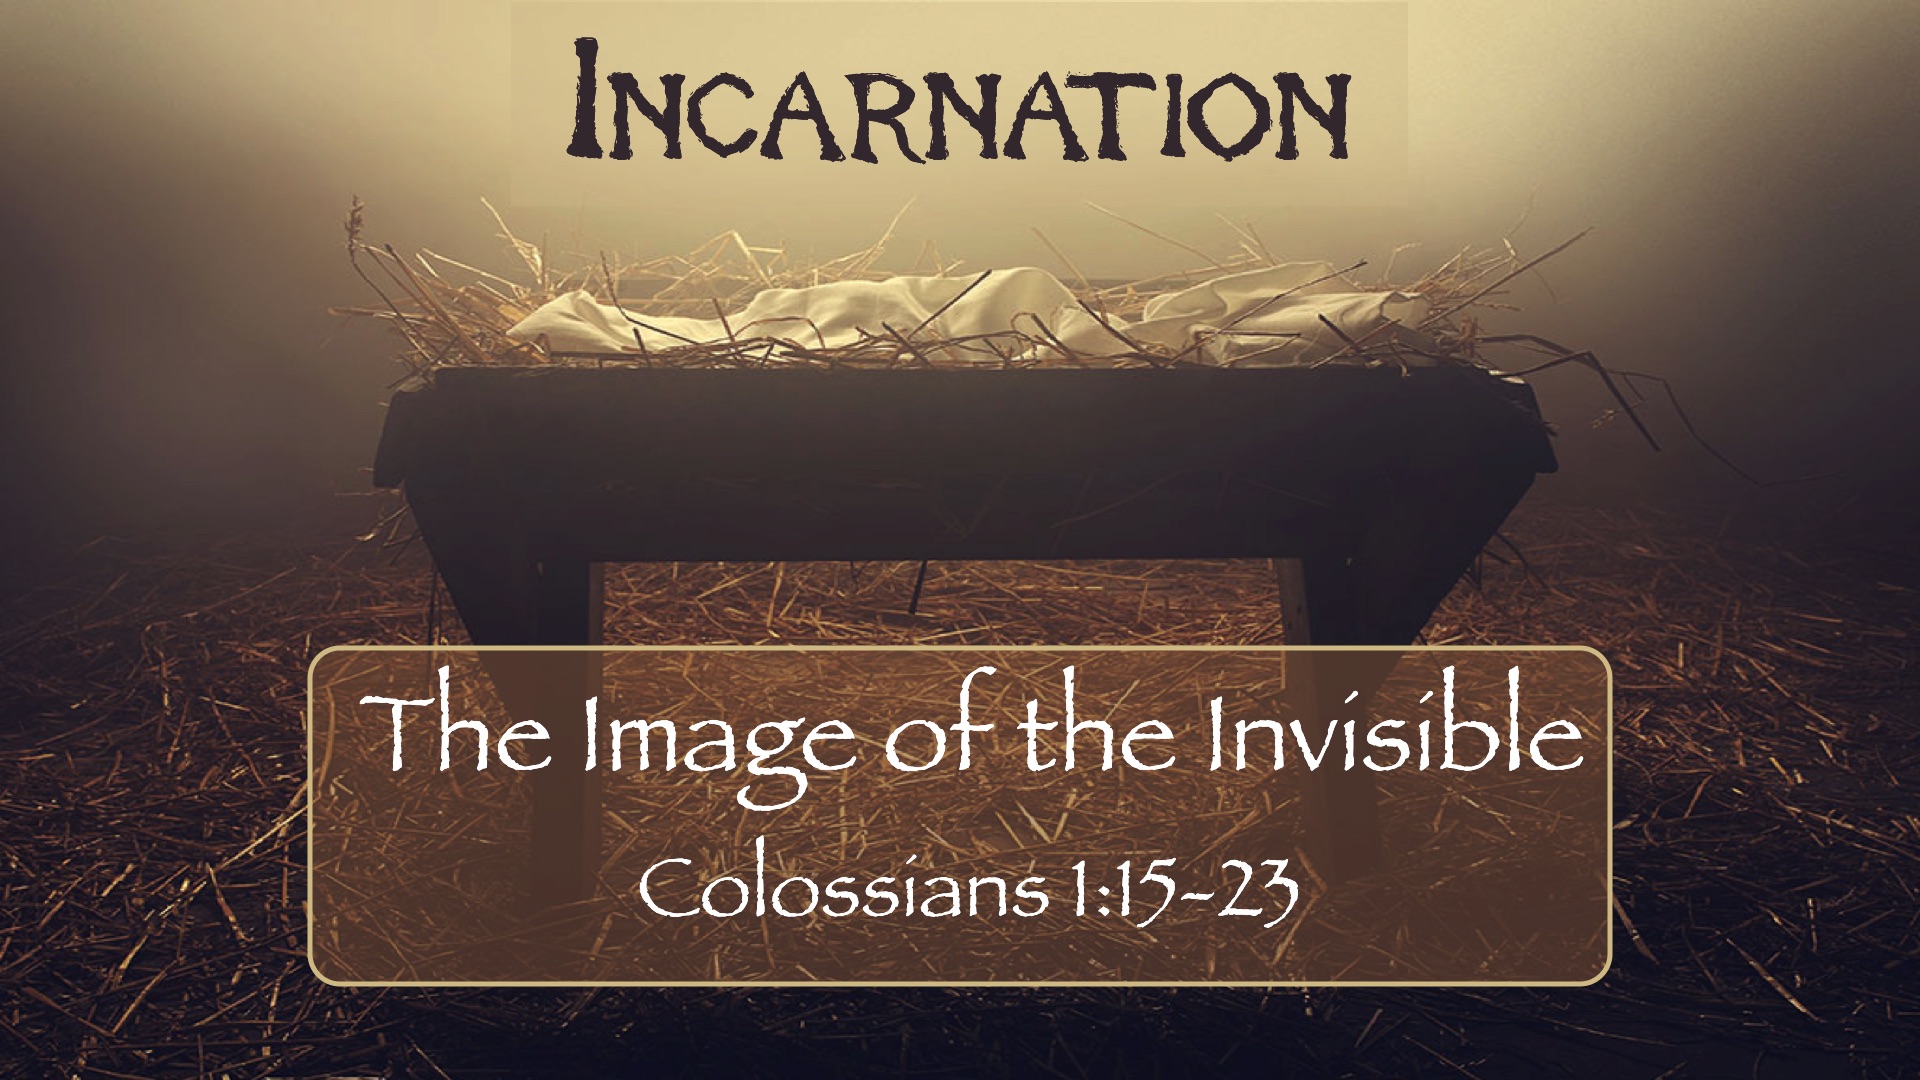 “Incarnation: The Image of the Invisible”